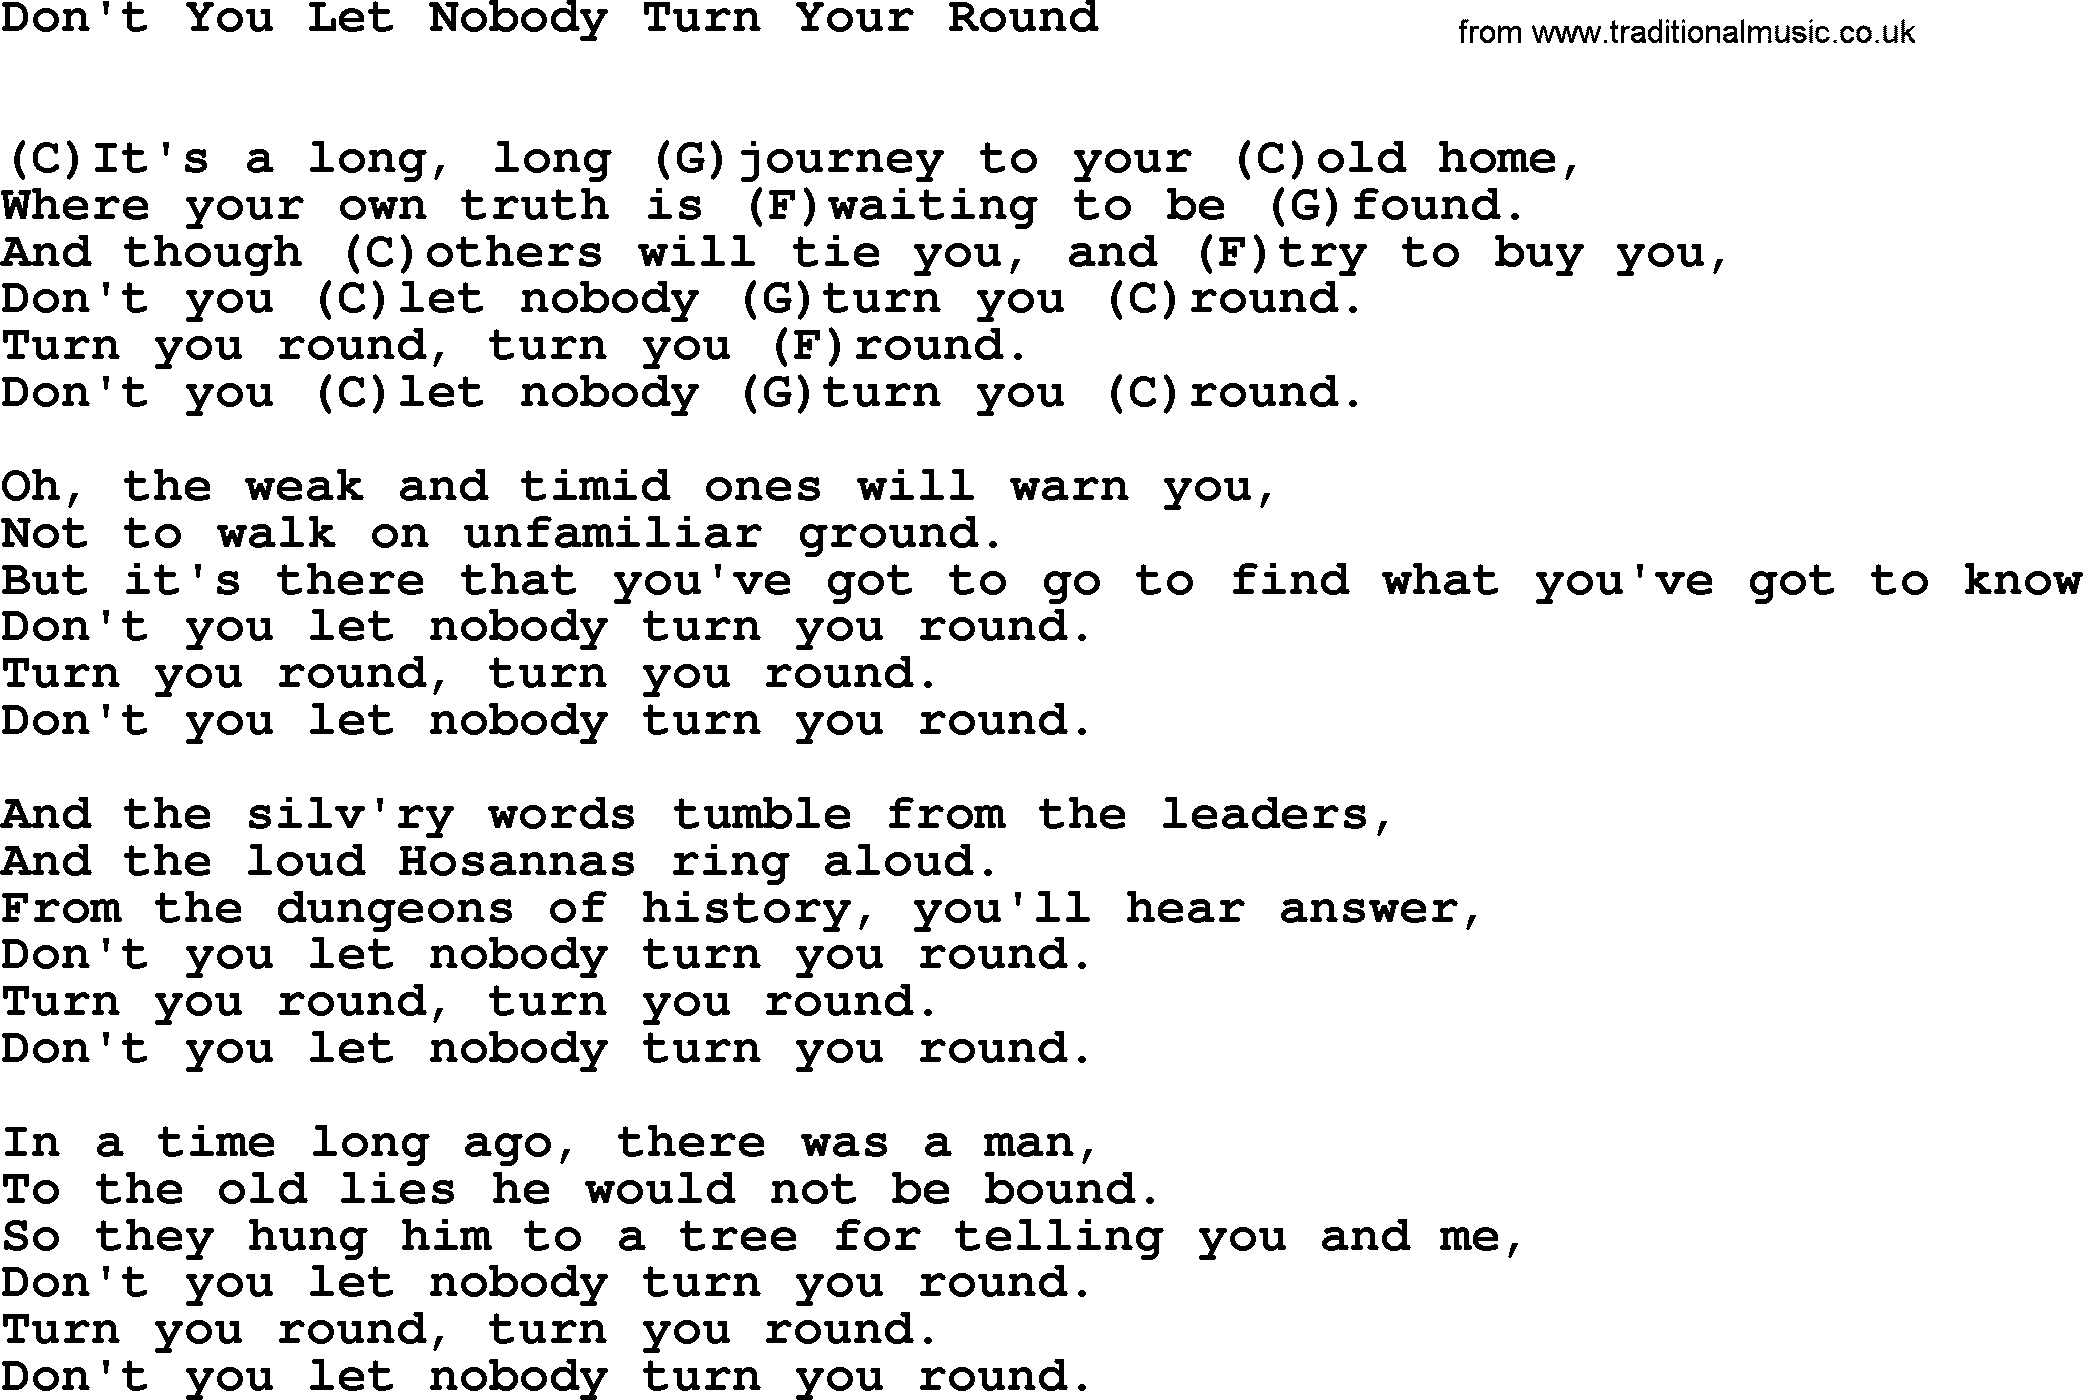 Tom Paxton song: Don't You Let Nobody Turn Your Round, lyrics and chords